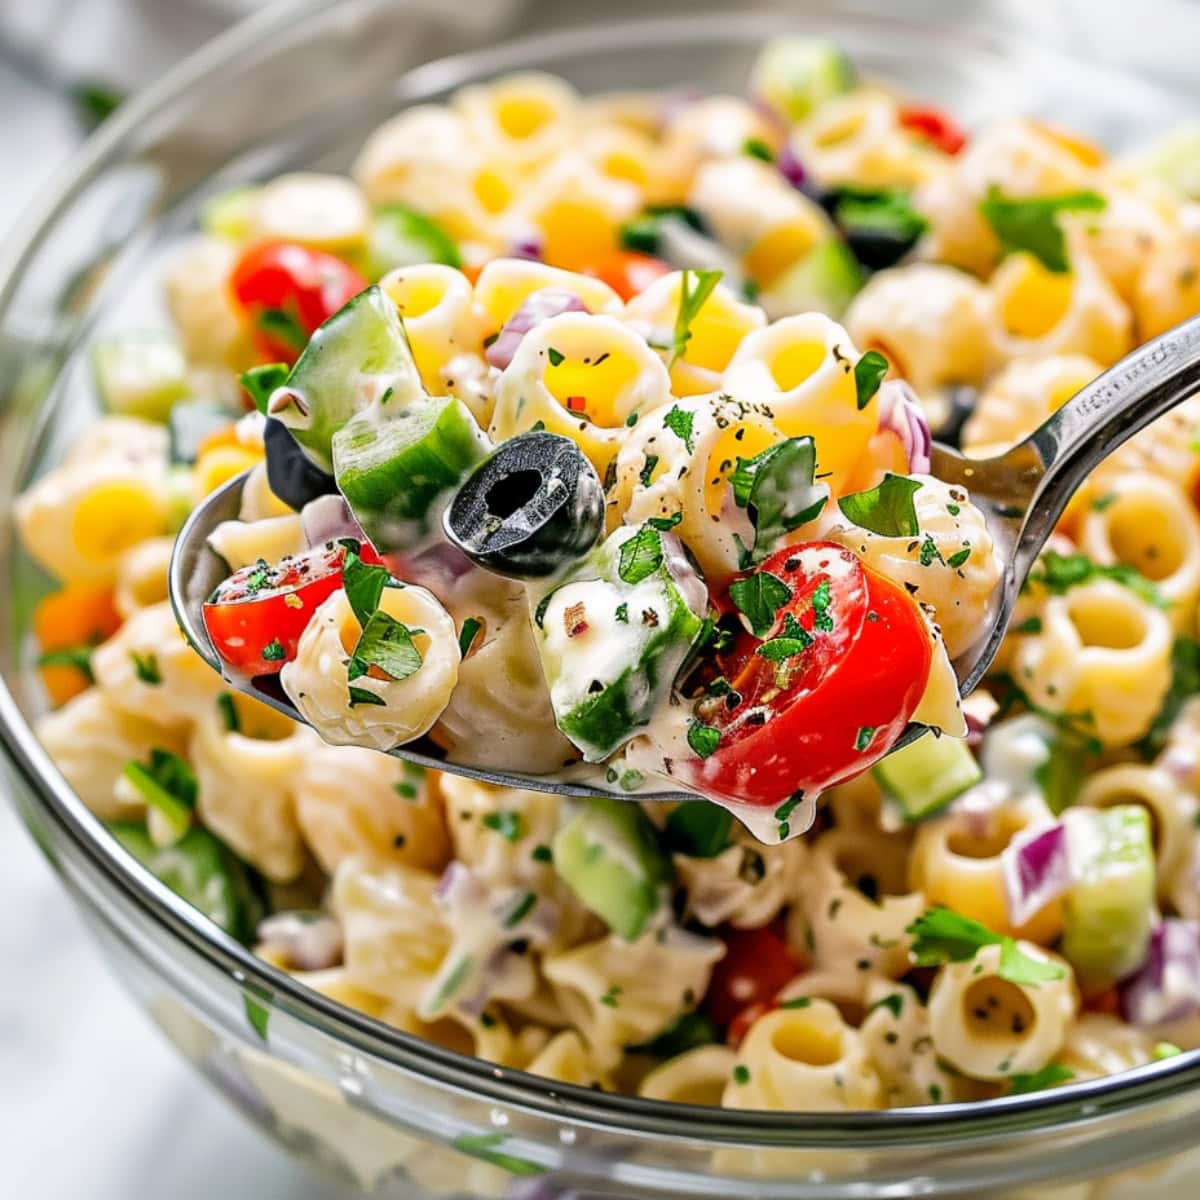 Ditalini pasta salad made with ditalini pasta, cherry tomatoes, cucumber, bell pepper, and red onion and creamy dressing served in a glass bowl.